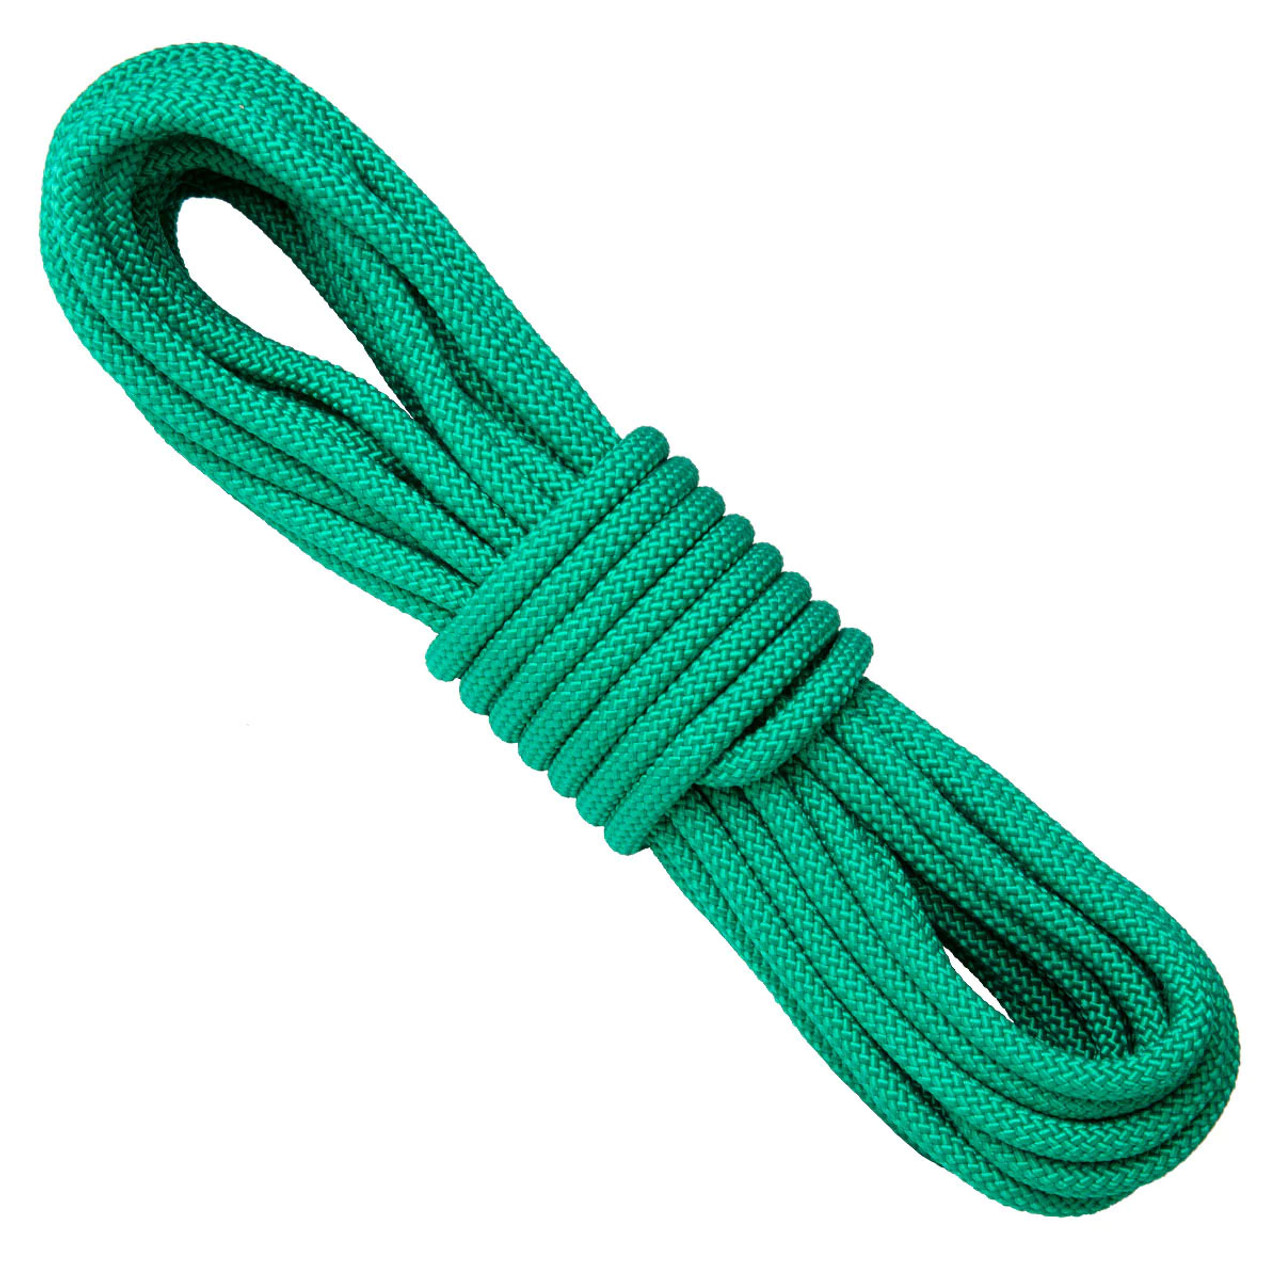 Atwood Rope Utility Rope 1/2 x 100 ft., various colors